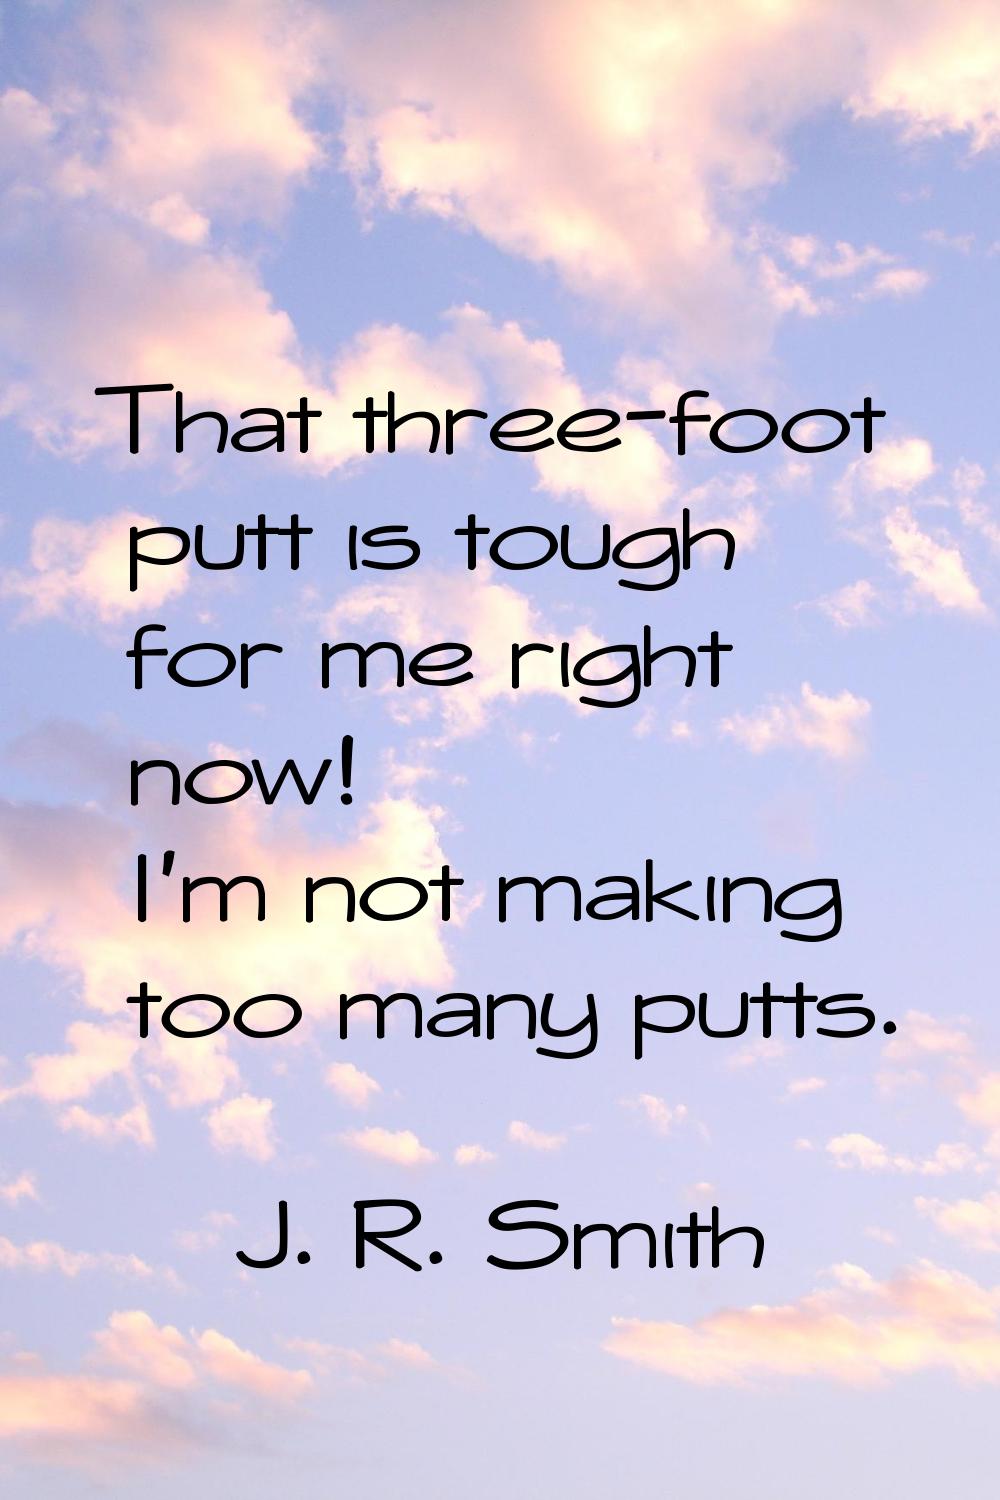 That three-foot putt is tough for me right now! I'm not making too many putts.